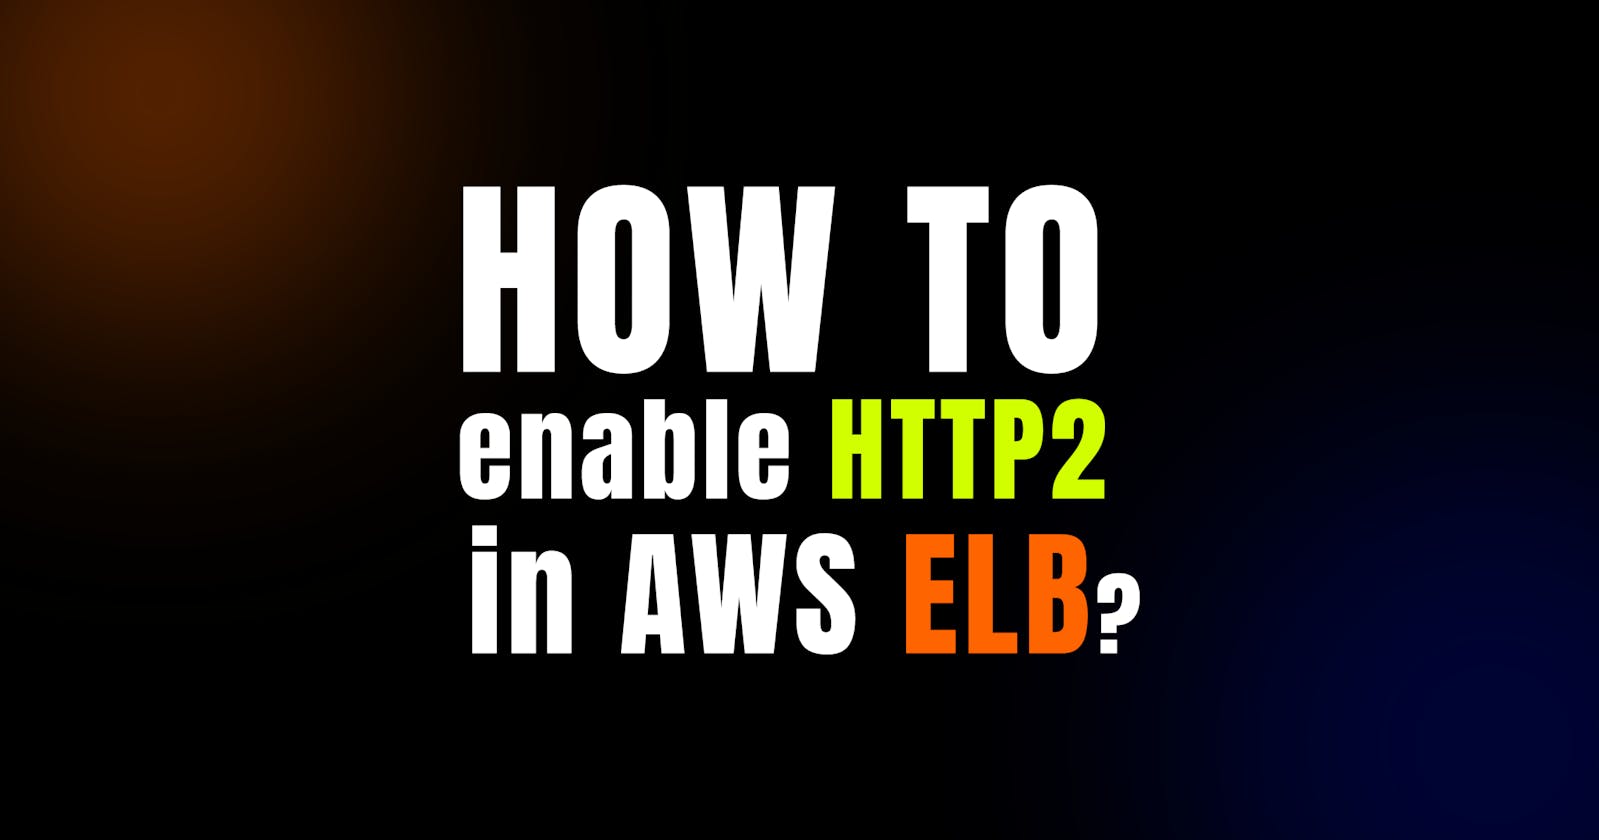 How to enable HTTP2 in AWS ELB?